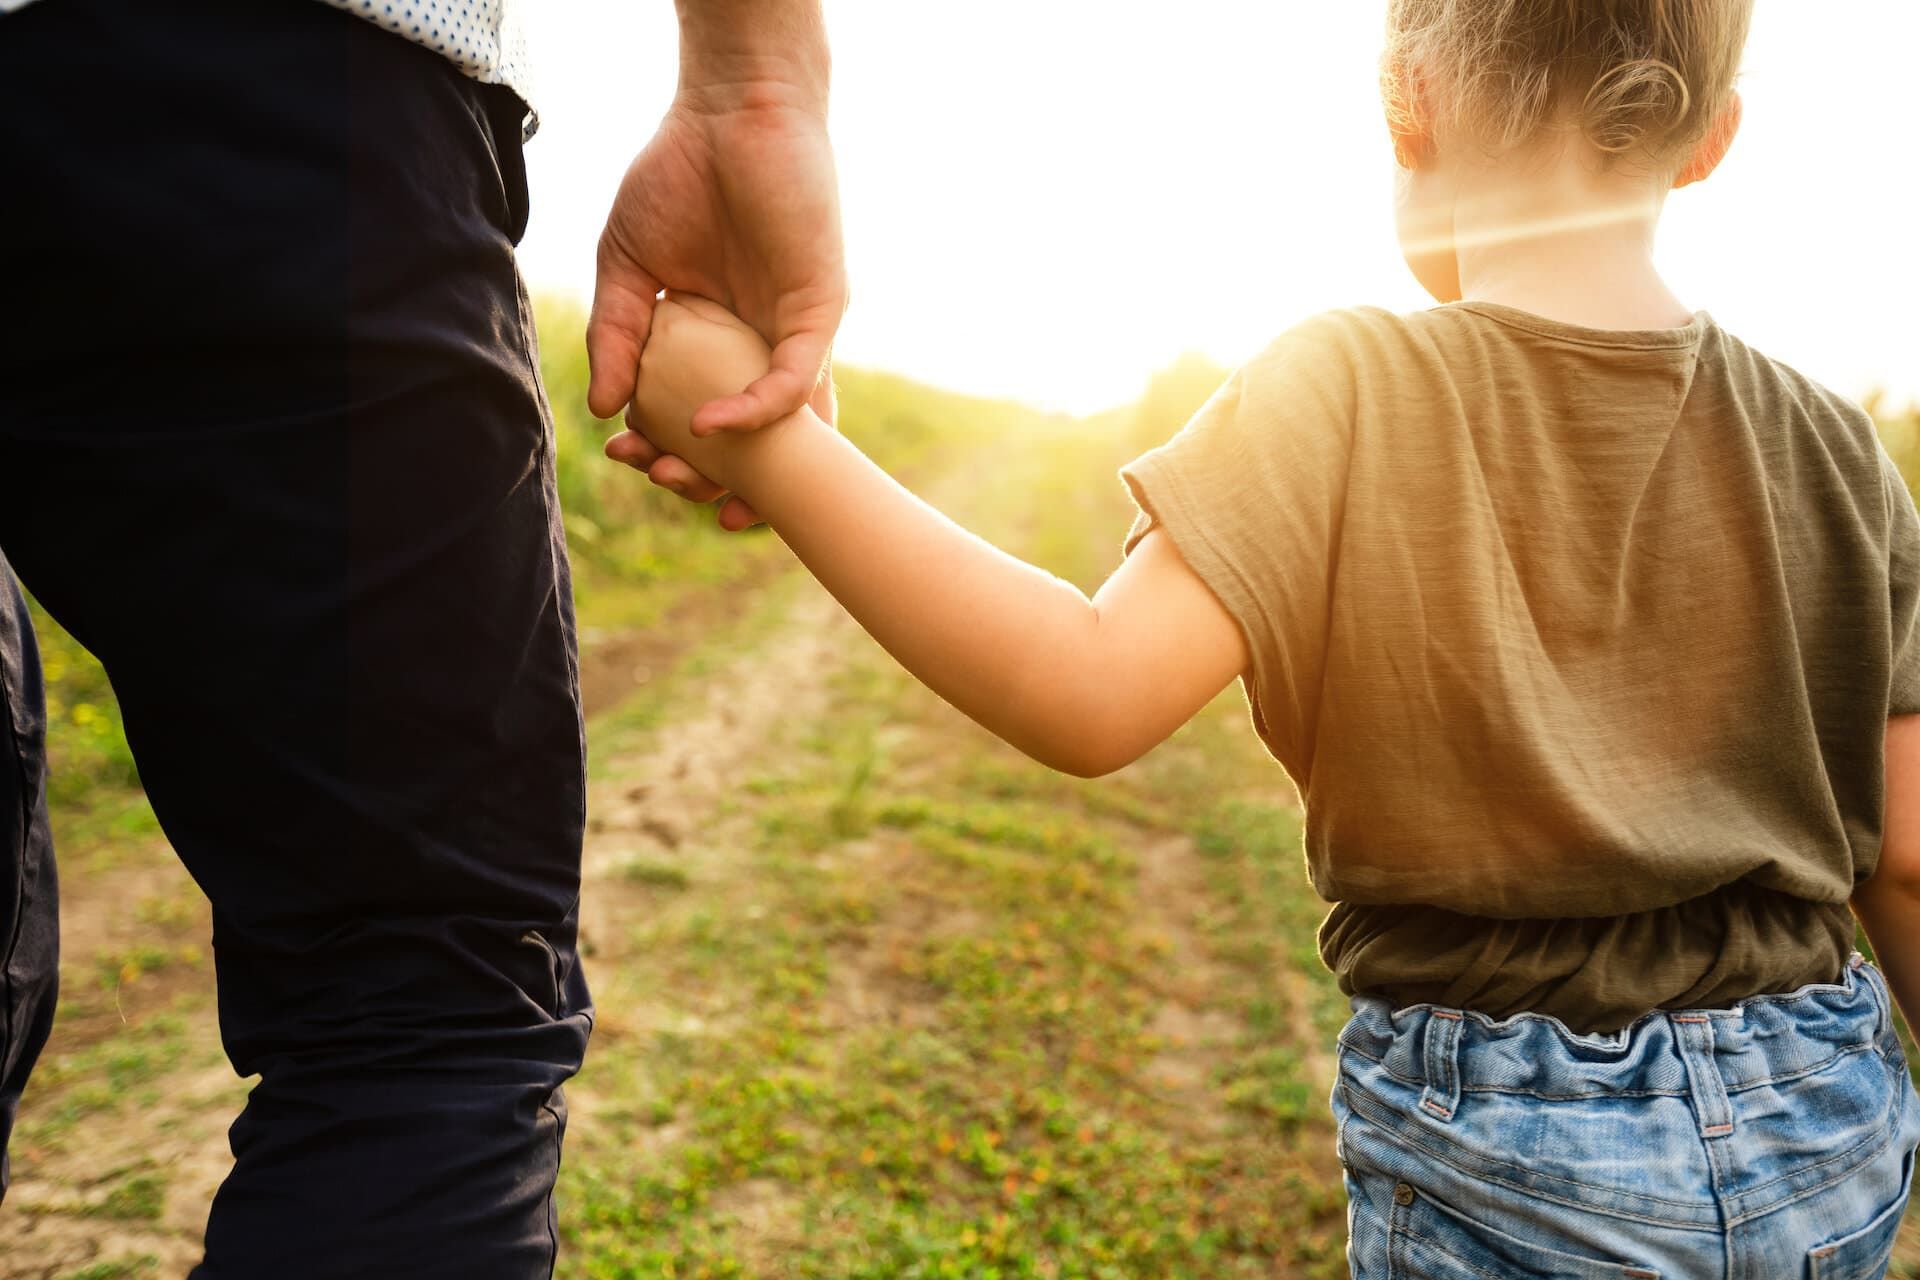 The Legal Timeframe For Keeping Your Child From The Other Parent In California